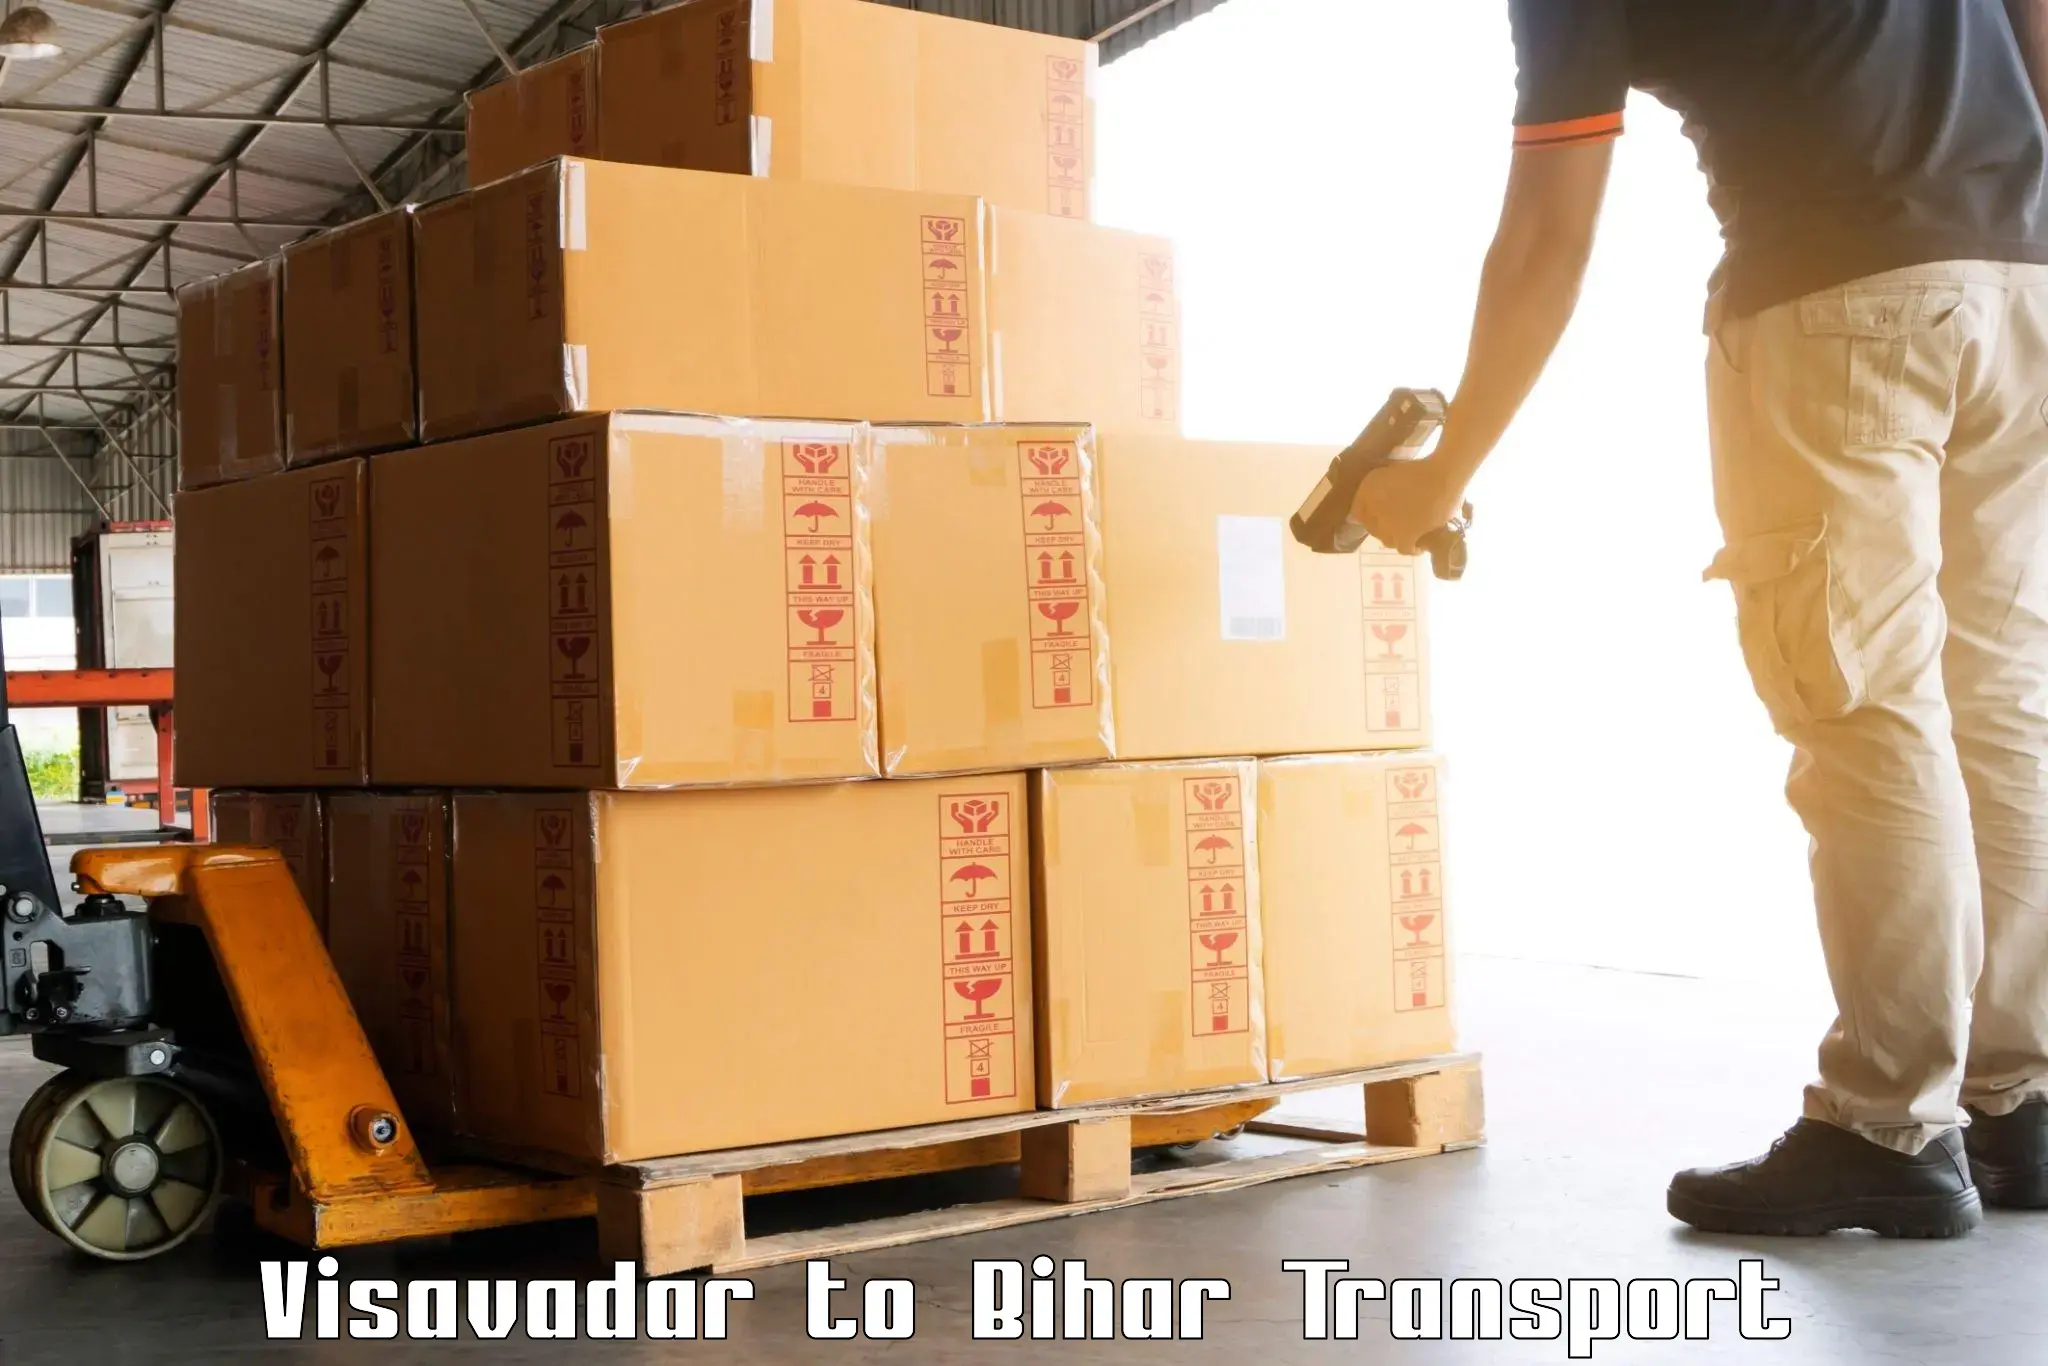 Transport bike from one state to another Visavadar to Sheohar